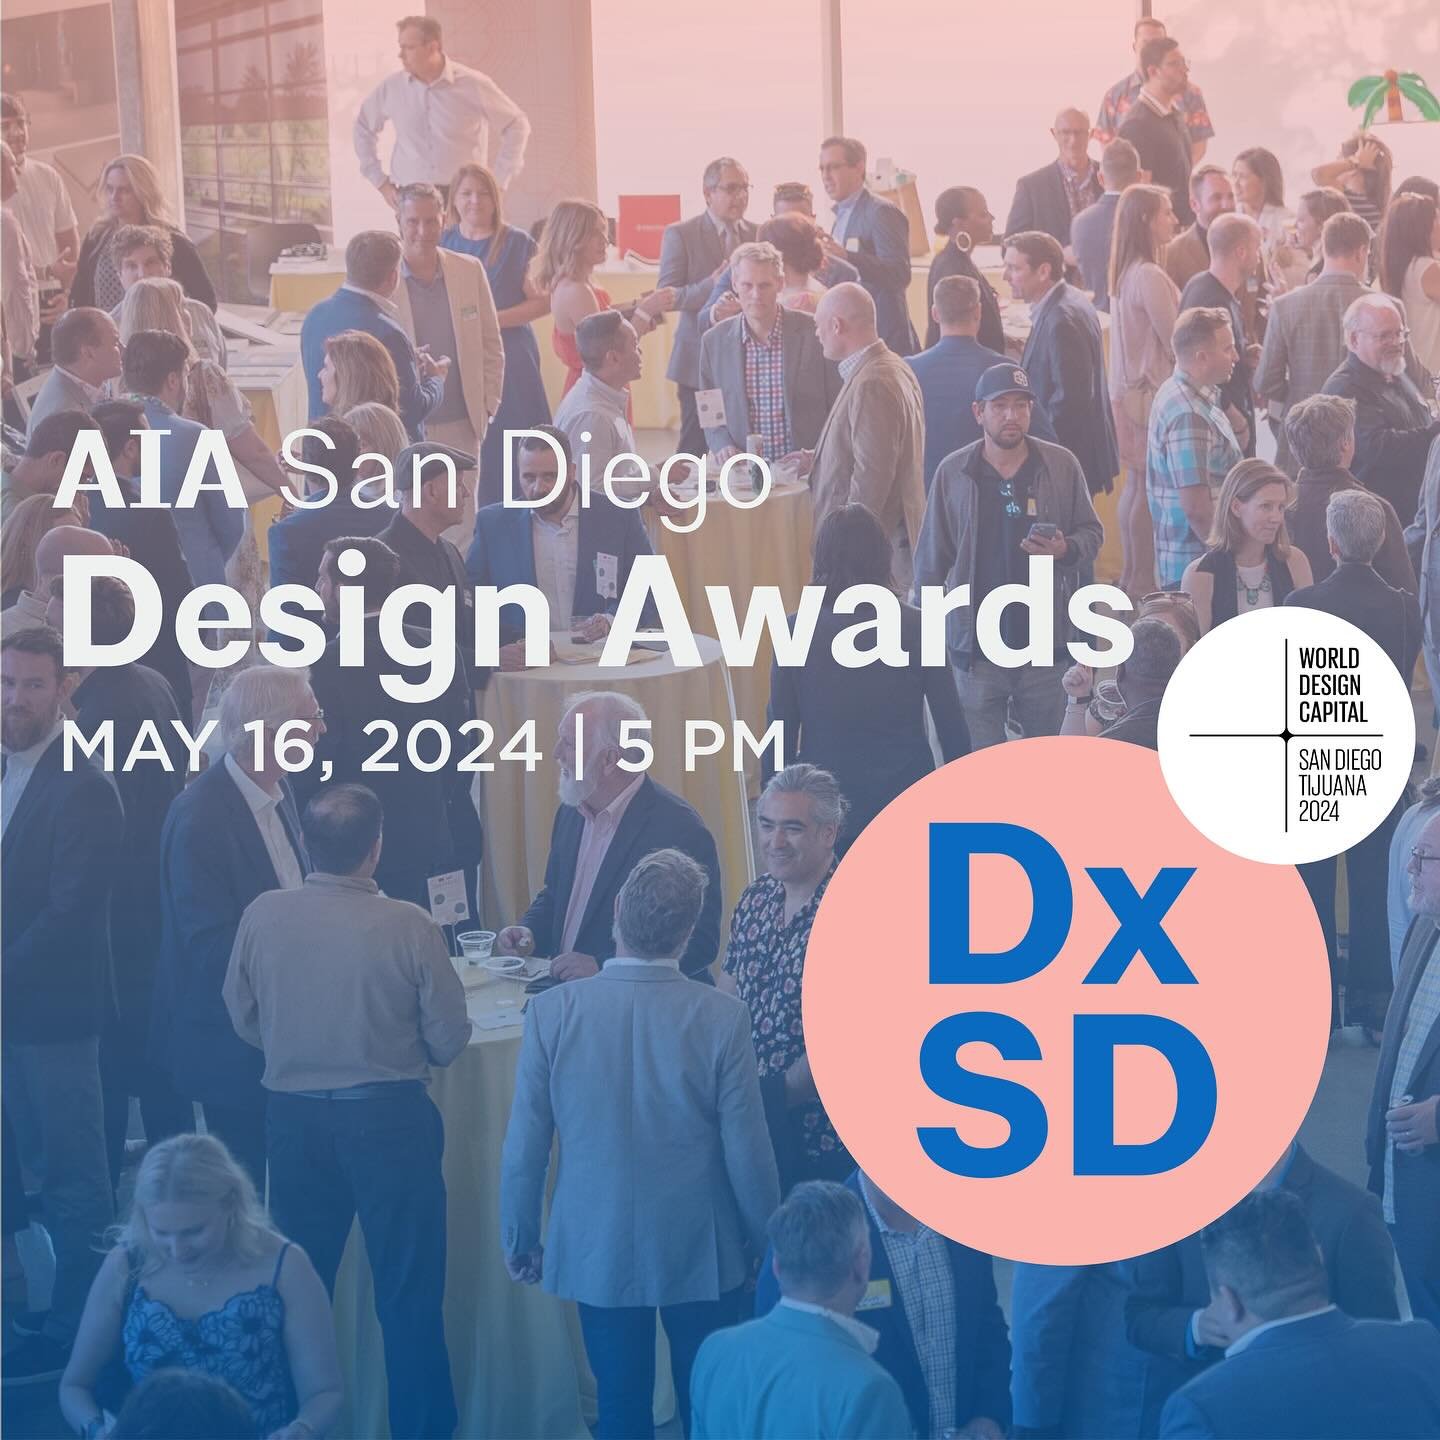 Mark your Calendars! 2024 Design Awards Ceremony is set for May 16th at UCSD Park + Market, and tickets are on sale now! Early bird pricing  available now through April 19! #DxSD24

Check out the link in bio to get your tickets today!